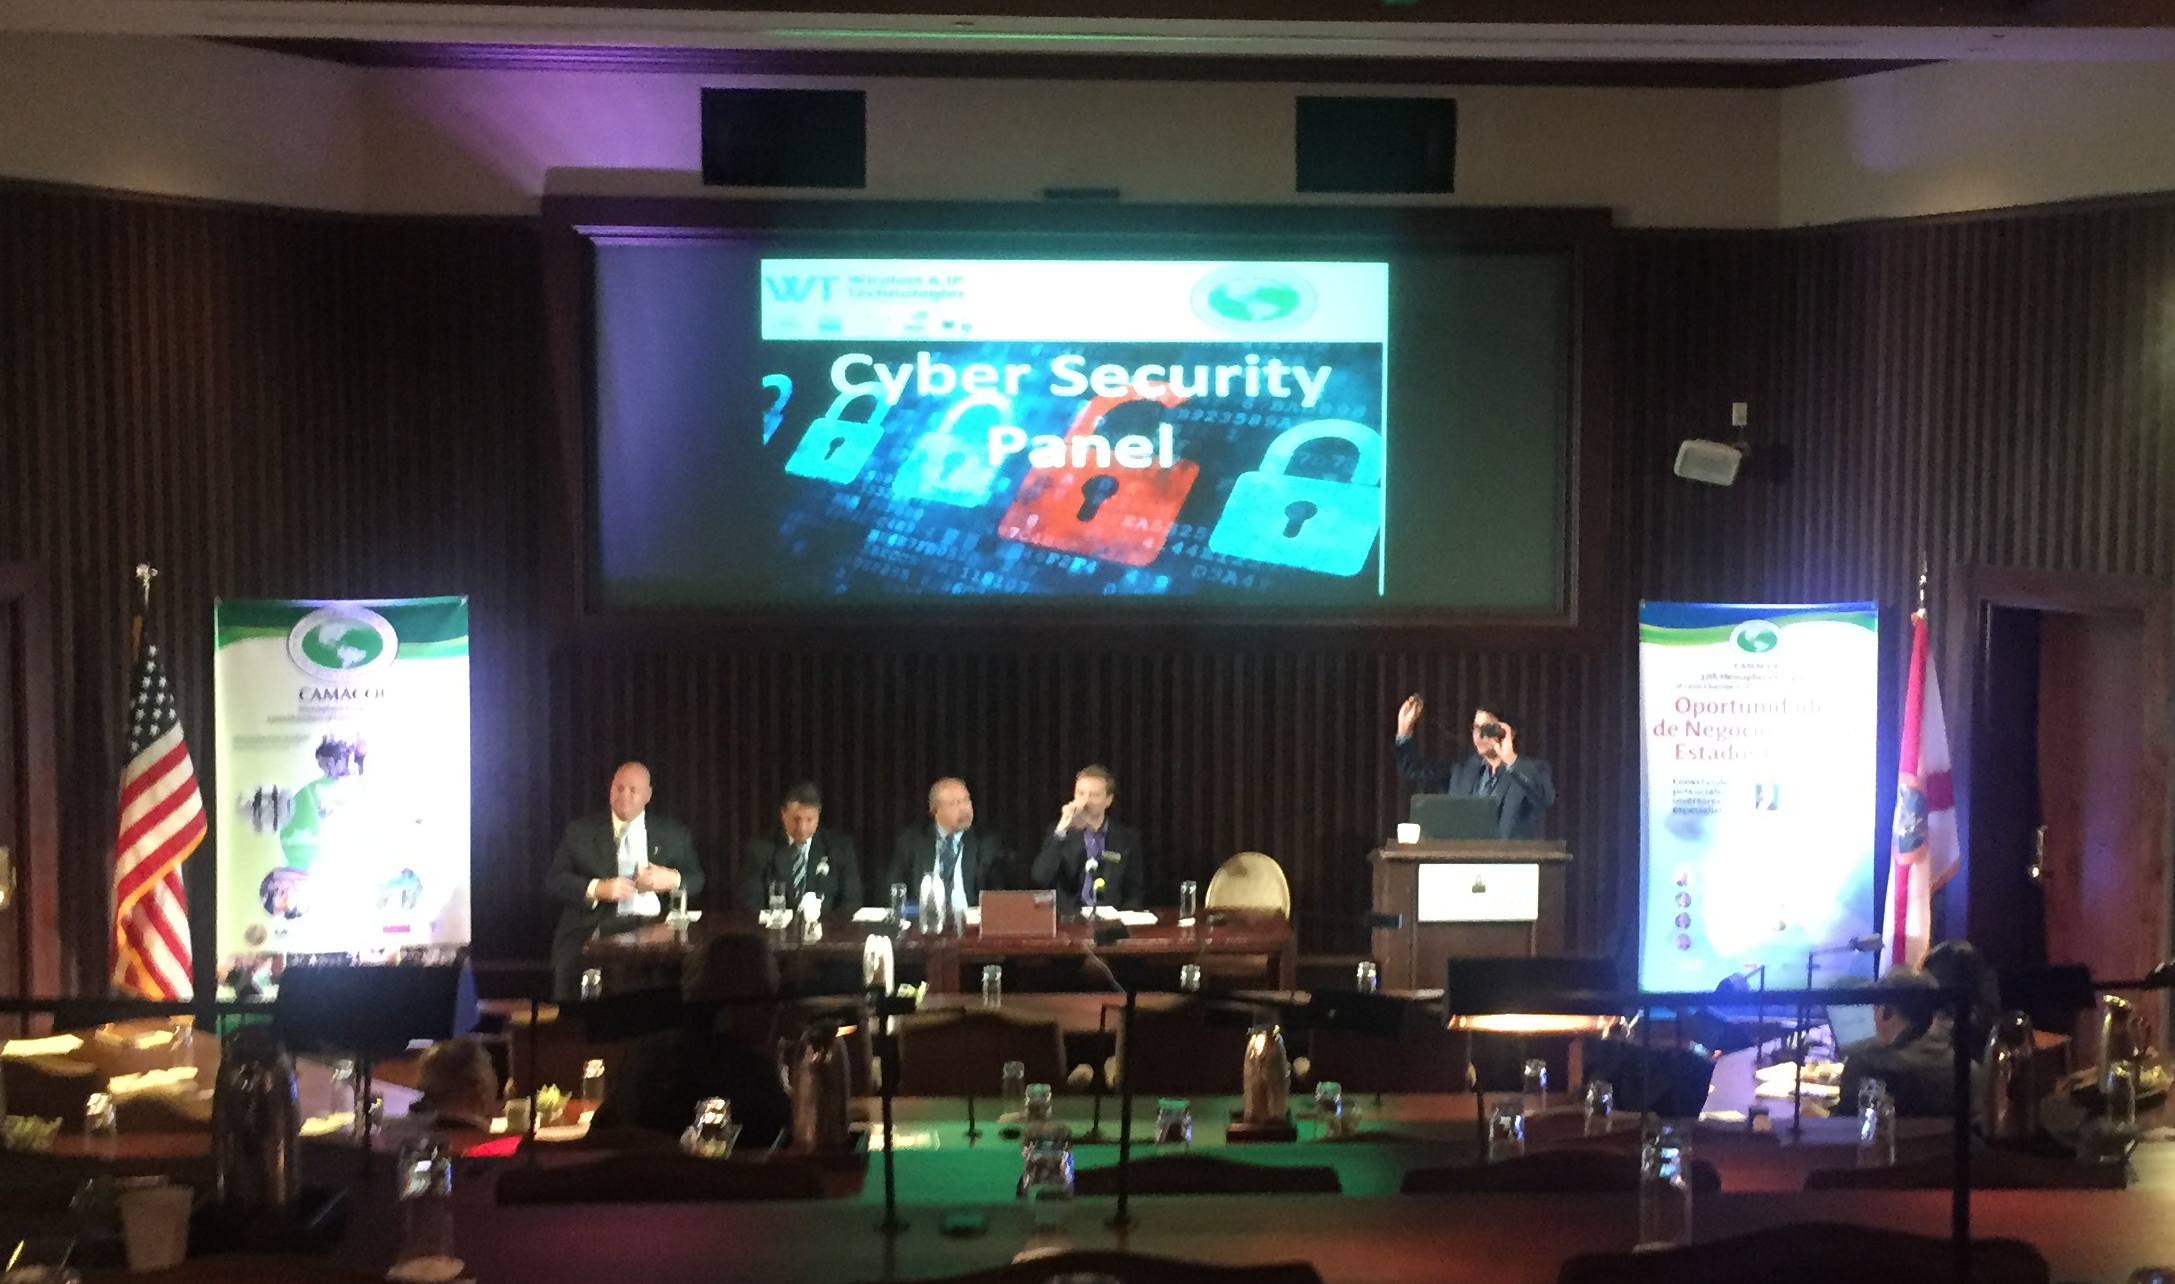 Axence - CAMACOL Cyber Security Panel